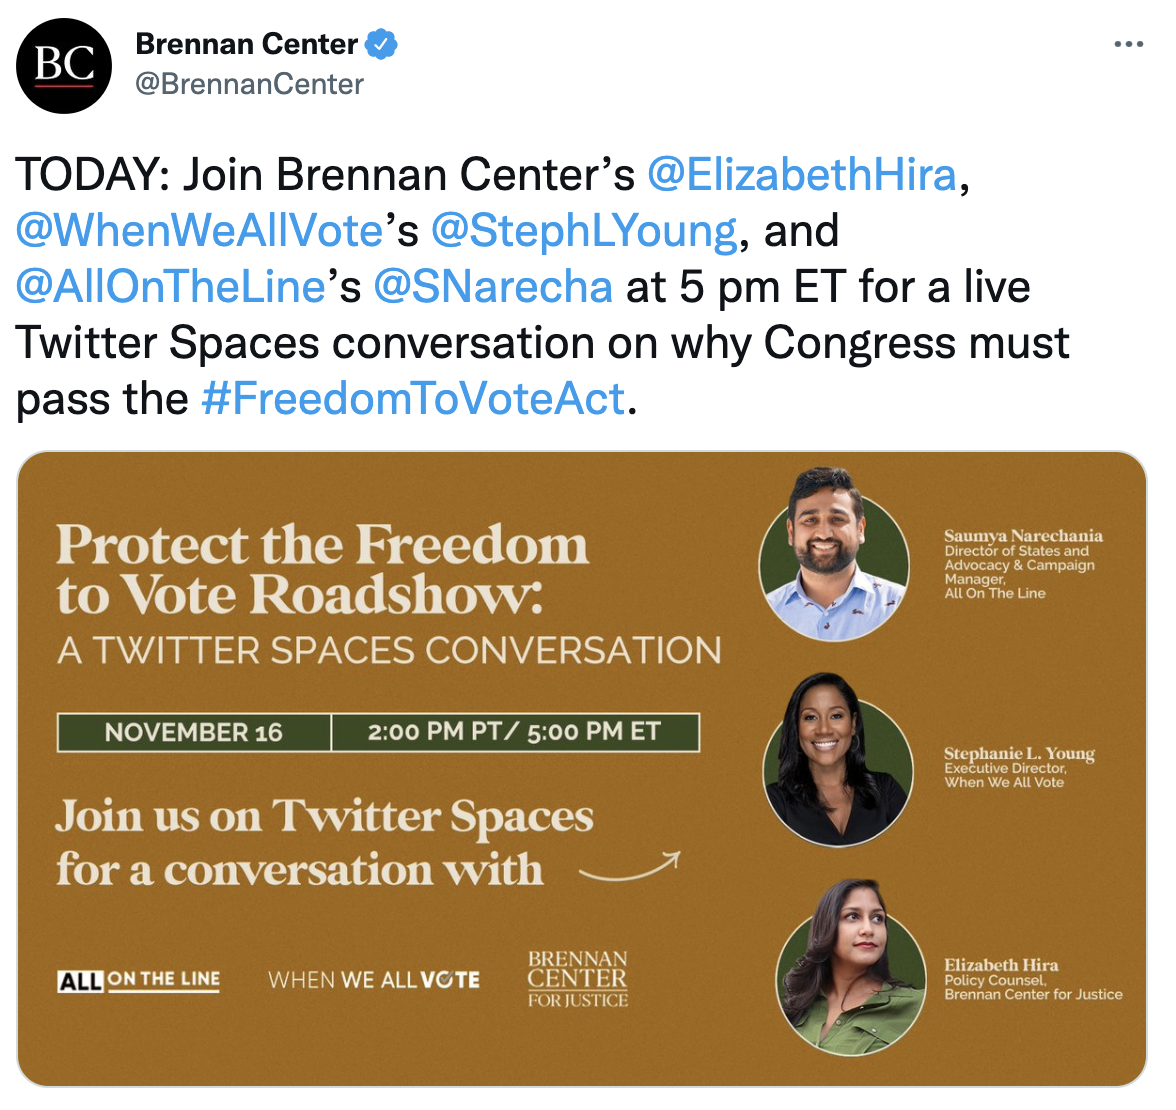 A promotional tweet by Brennan Center sharing information about their upcoming Twitter Spaces conversation.